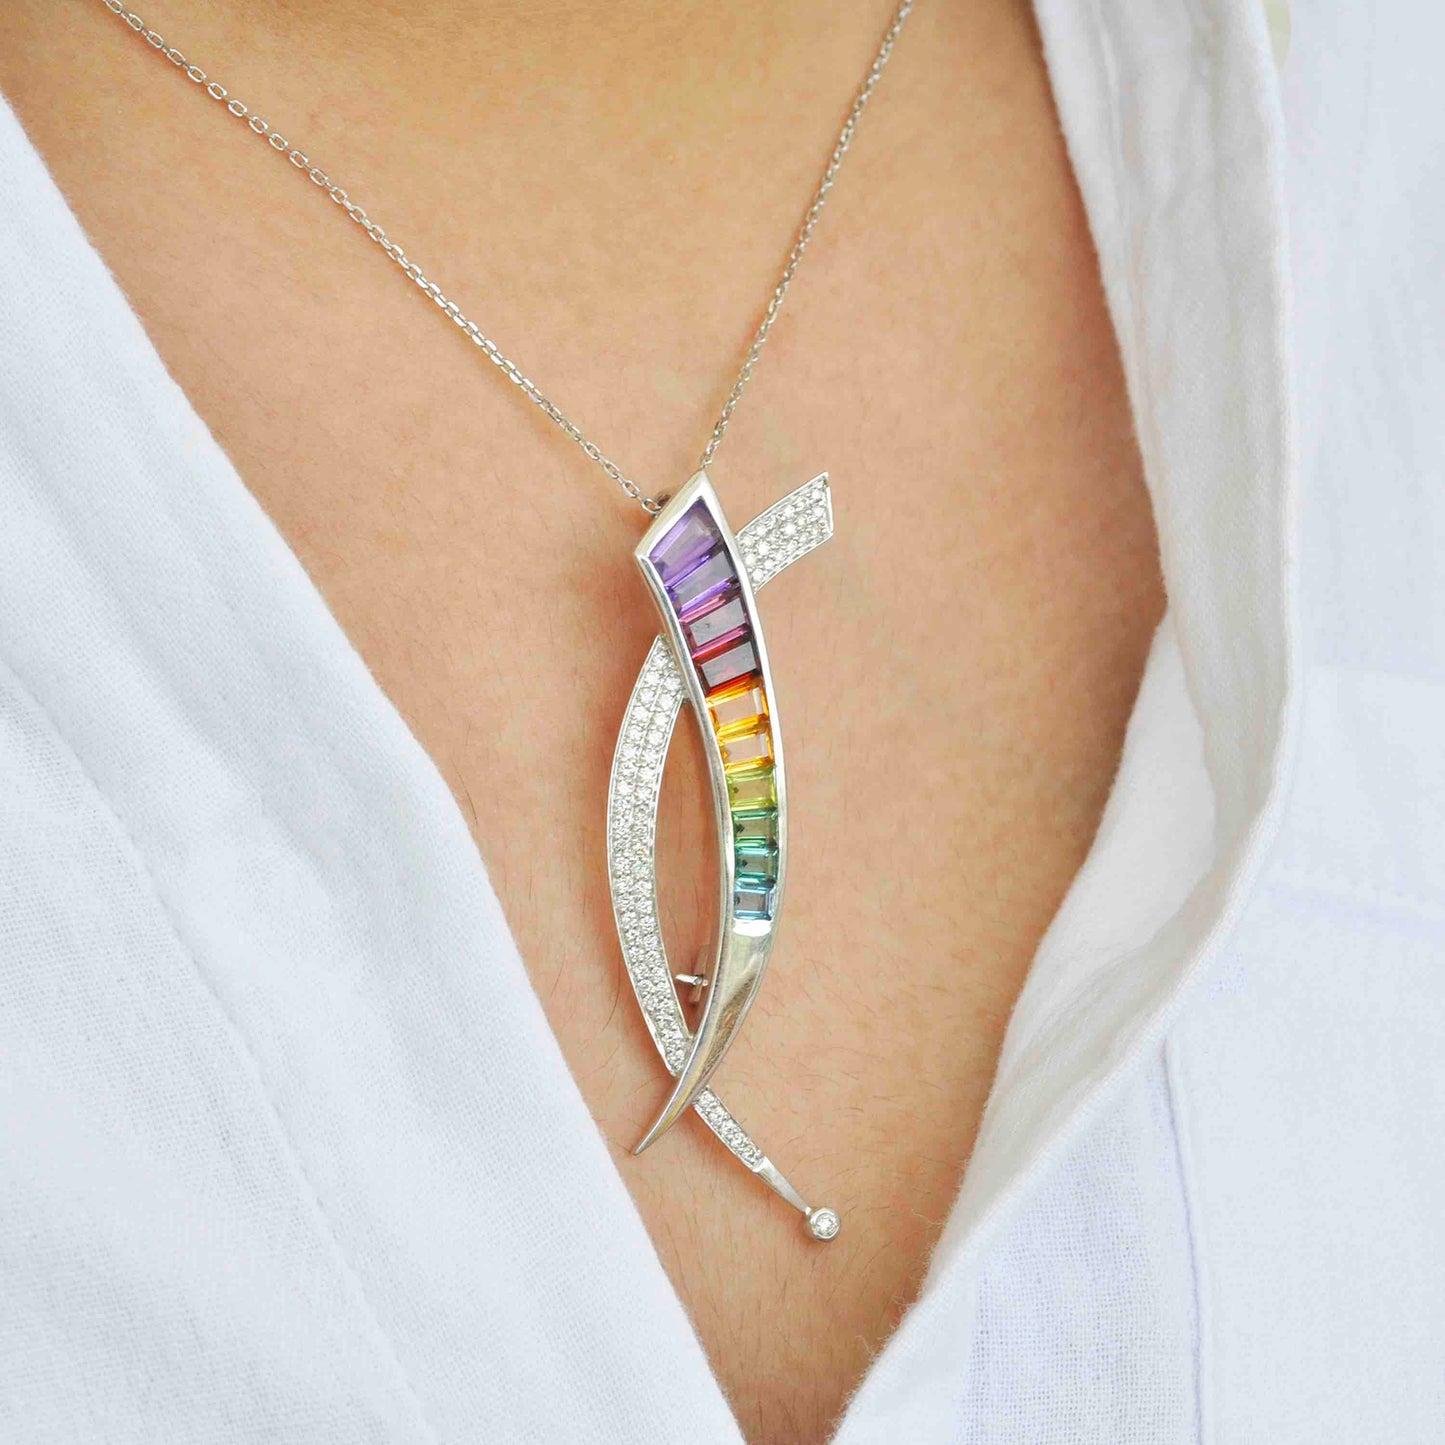 pride inspired pendant necklace